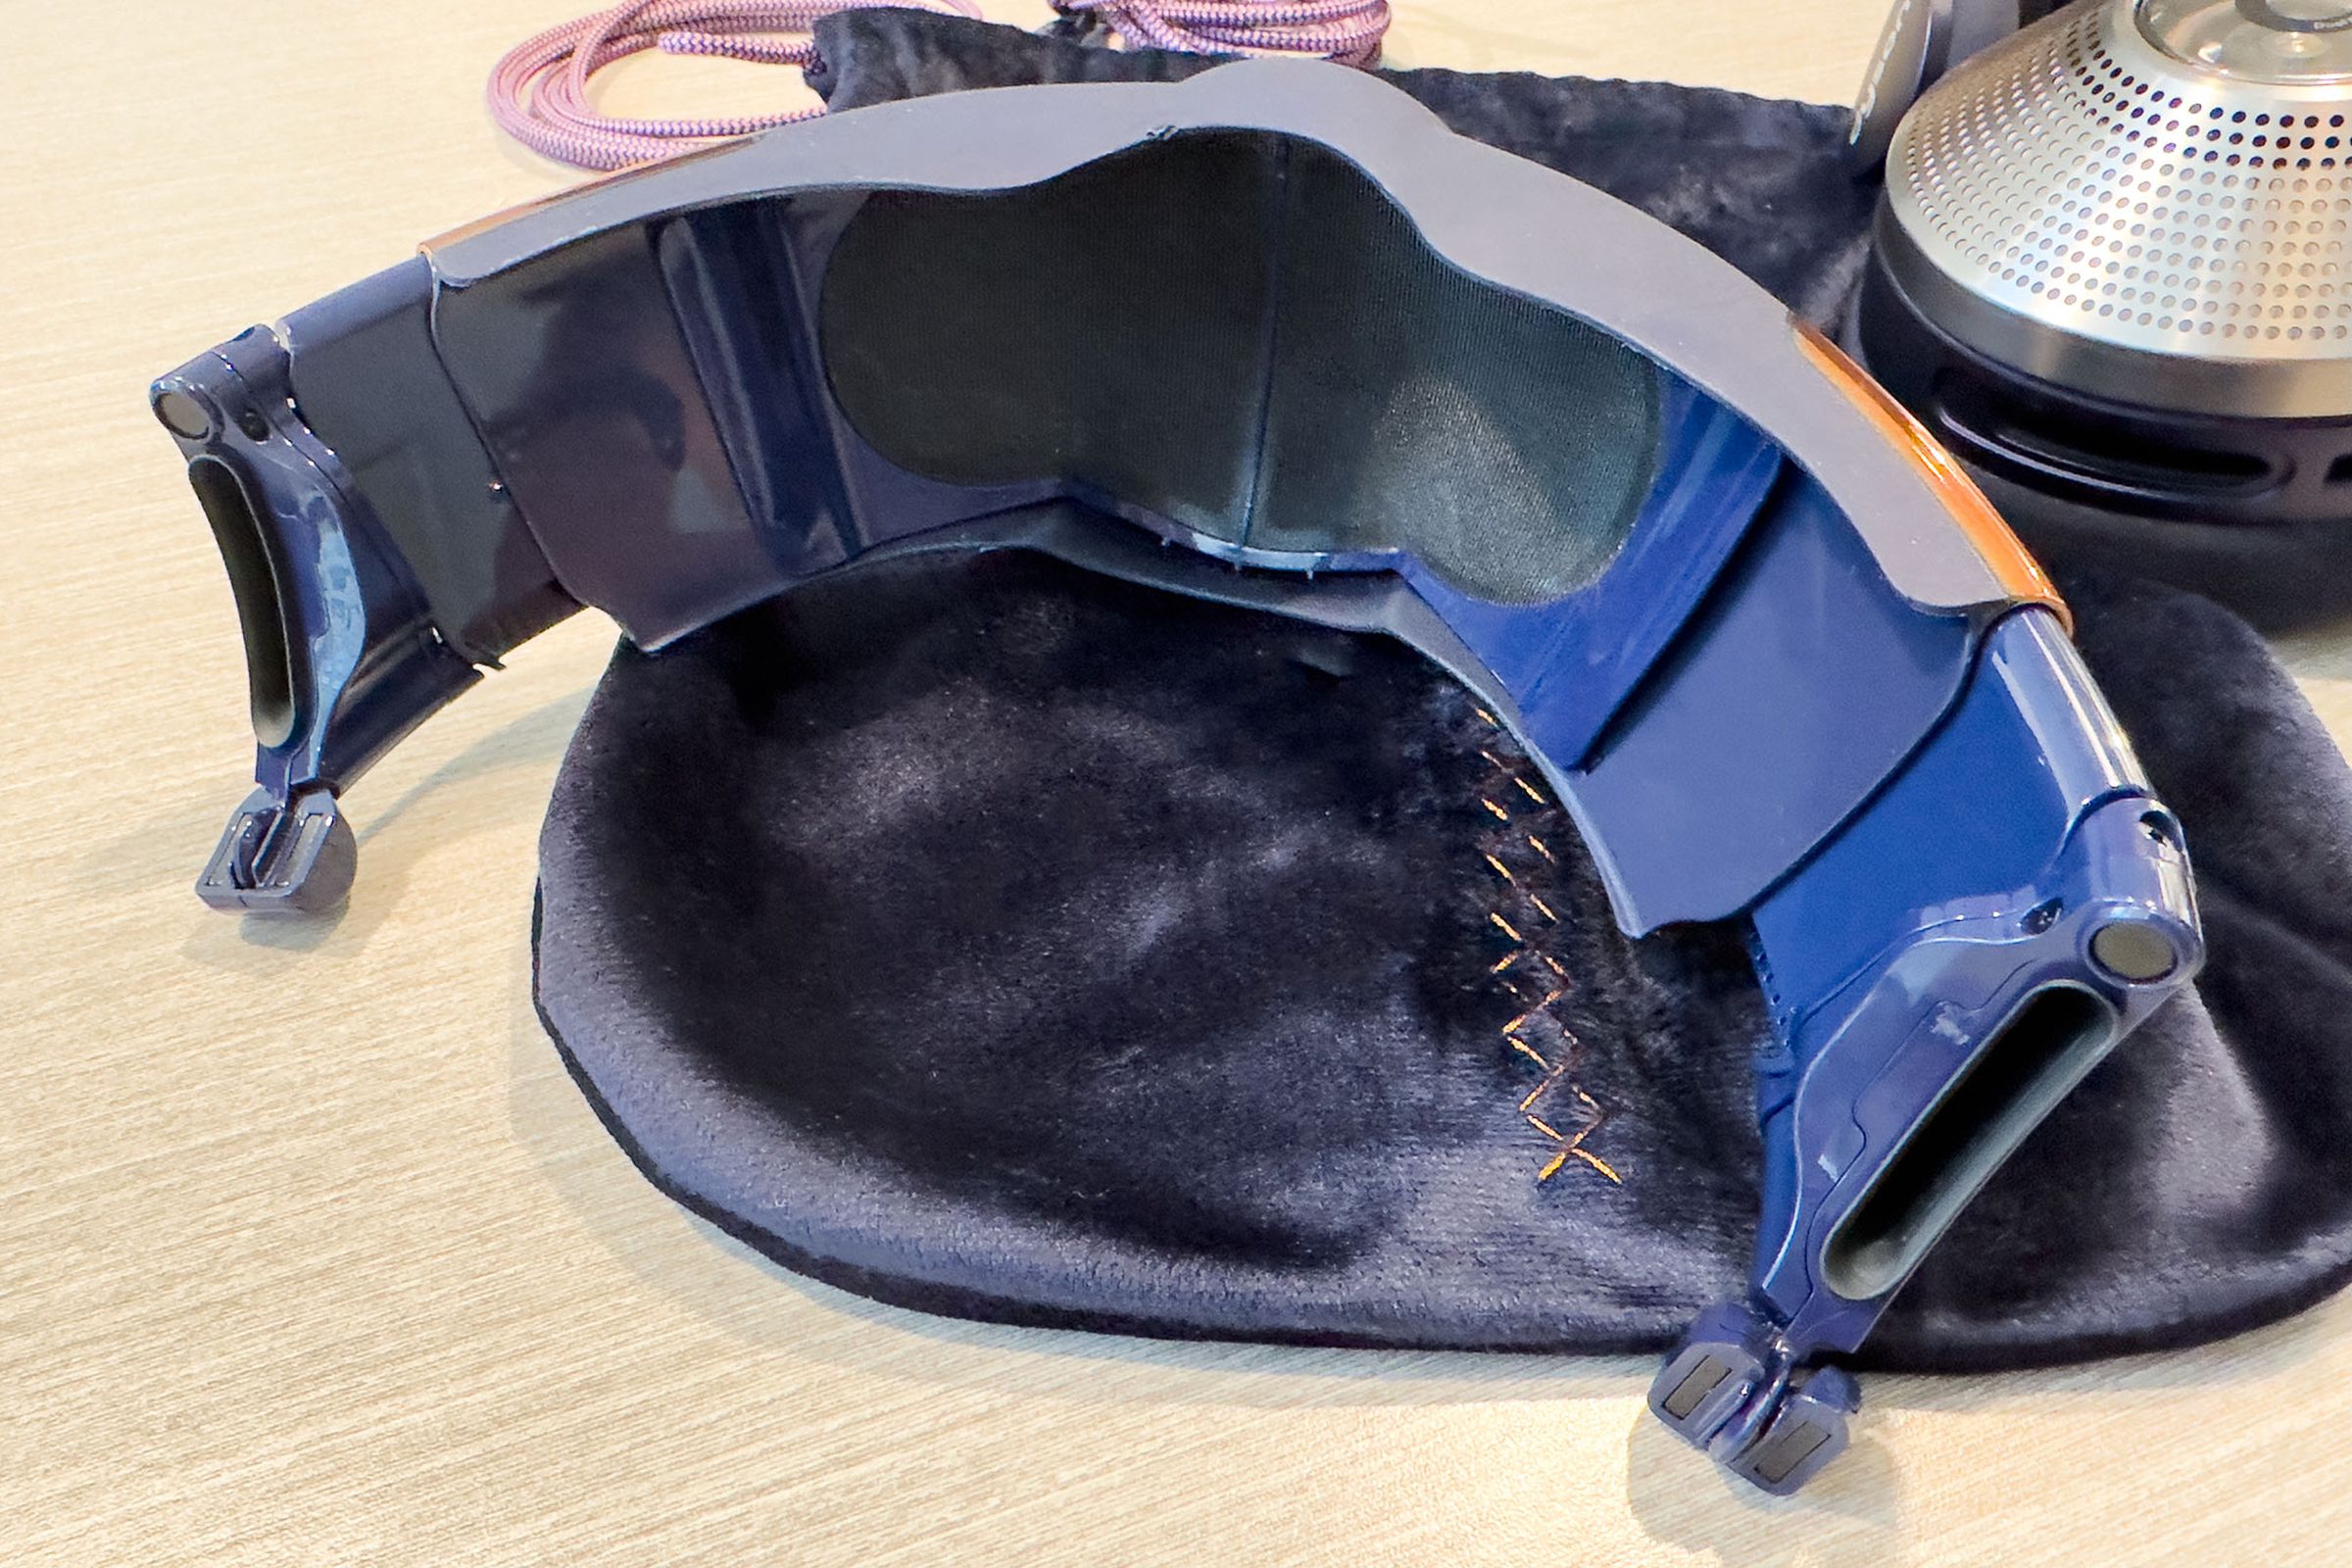 The inside view of the Dyson Zone’s face visor